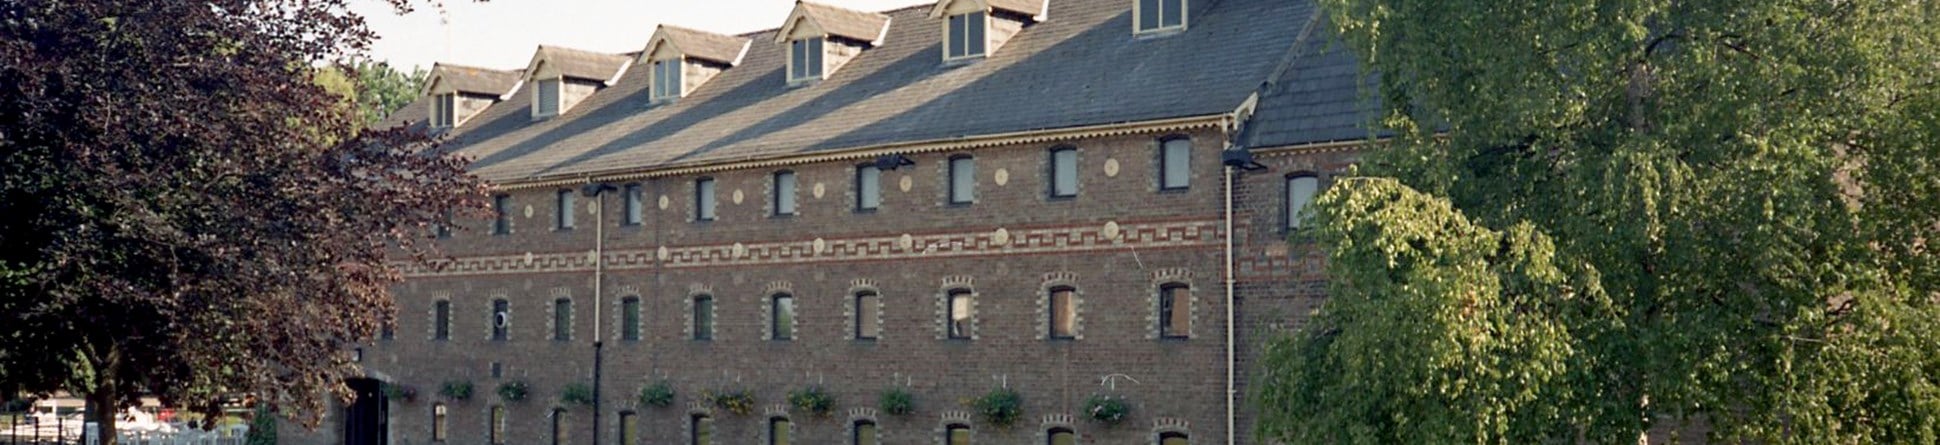 A colour photograph of the exterior of a former maltings building with a contrasting brick frieze band running above the second storey.